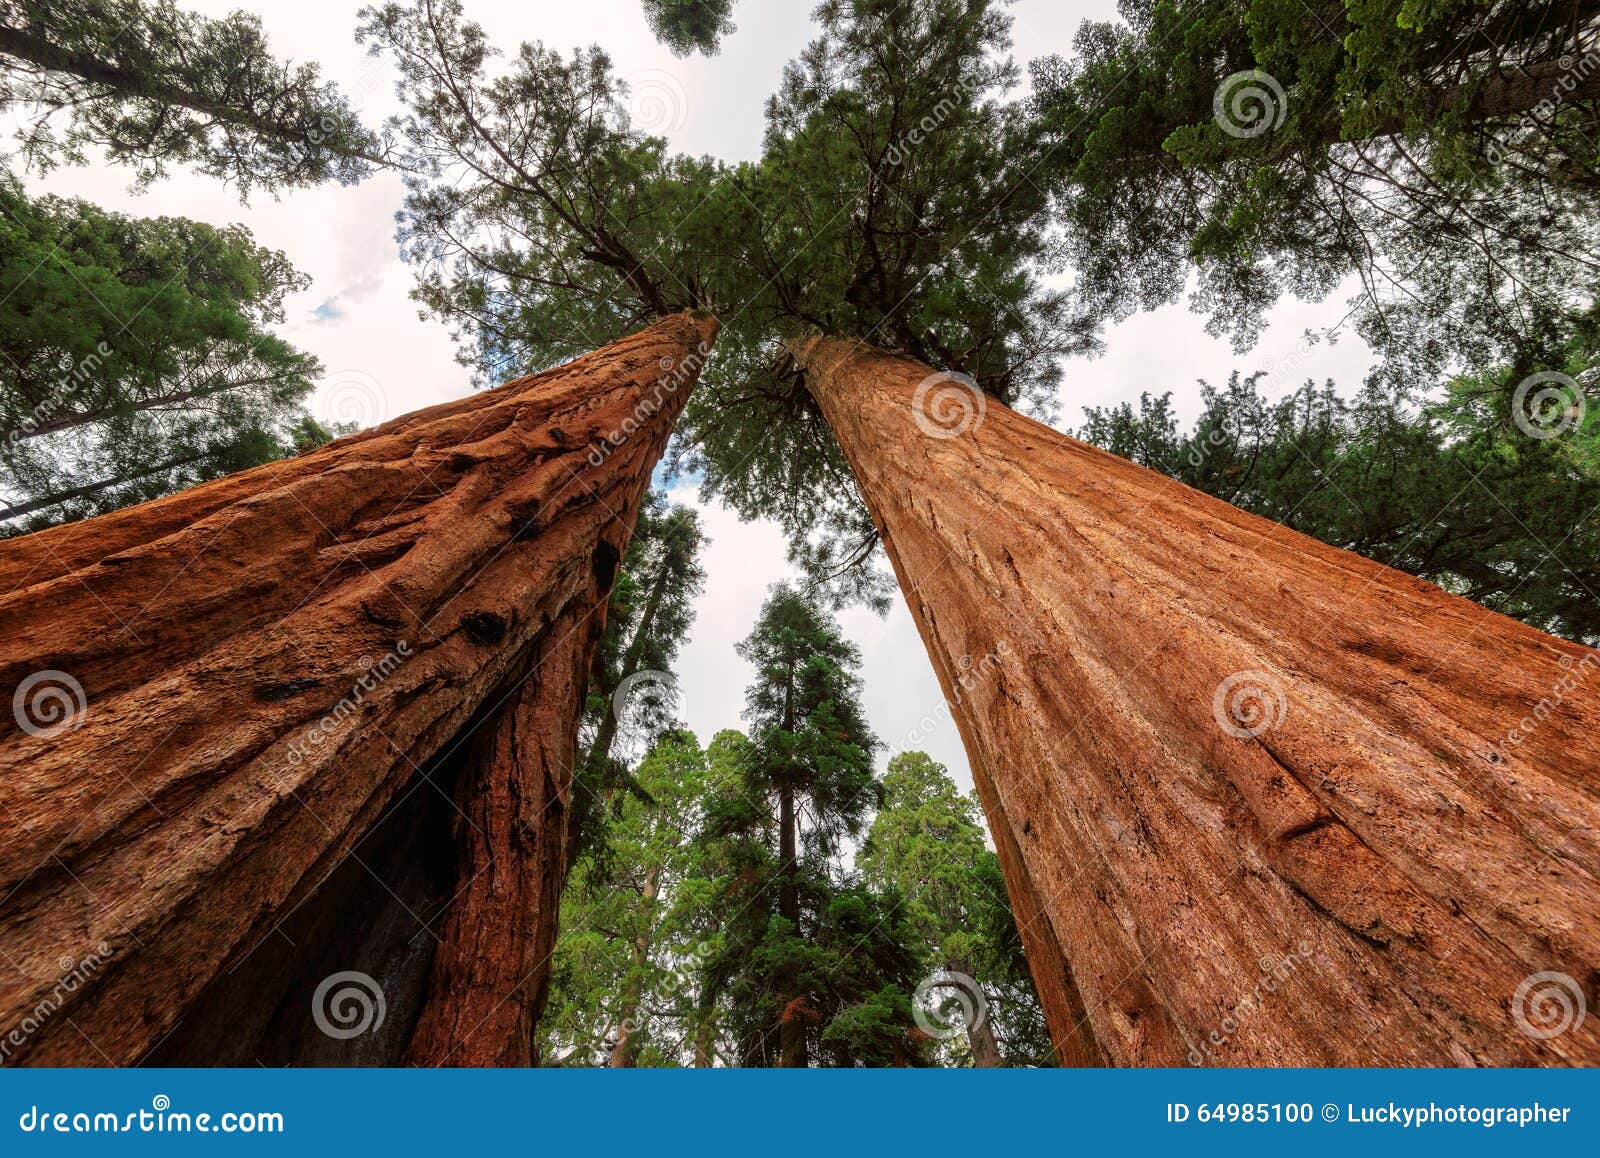 giant sequoias in the sequoia national park in california